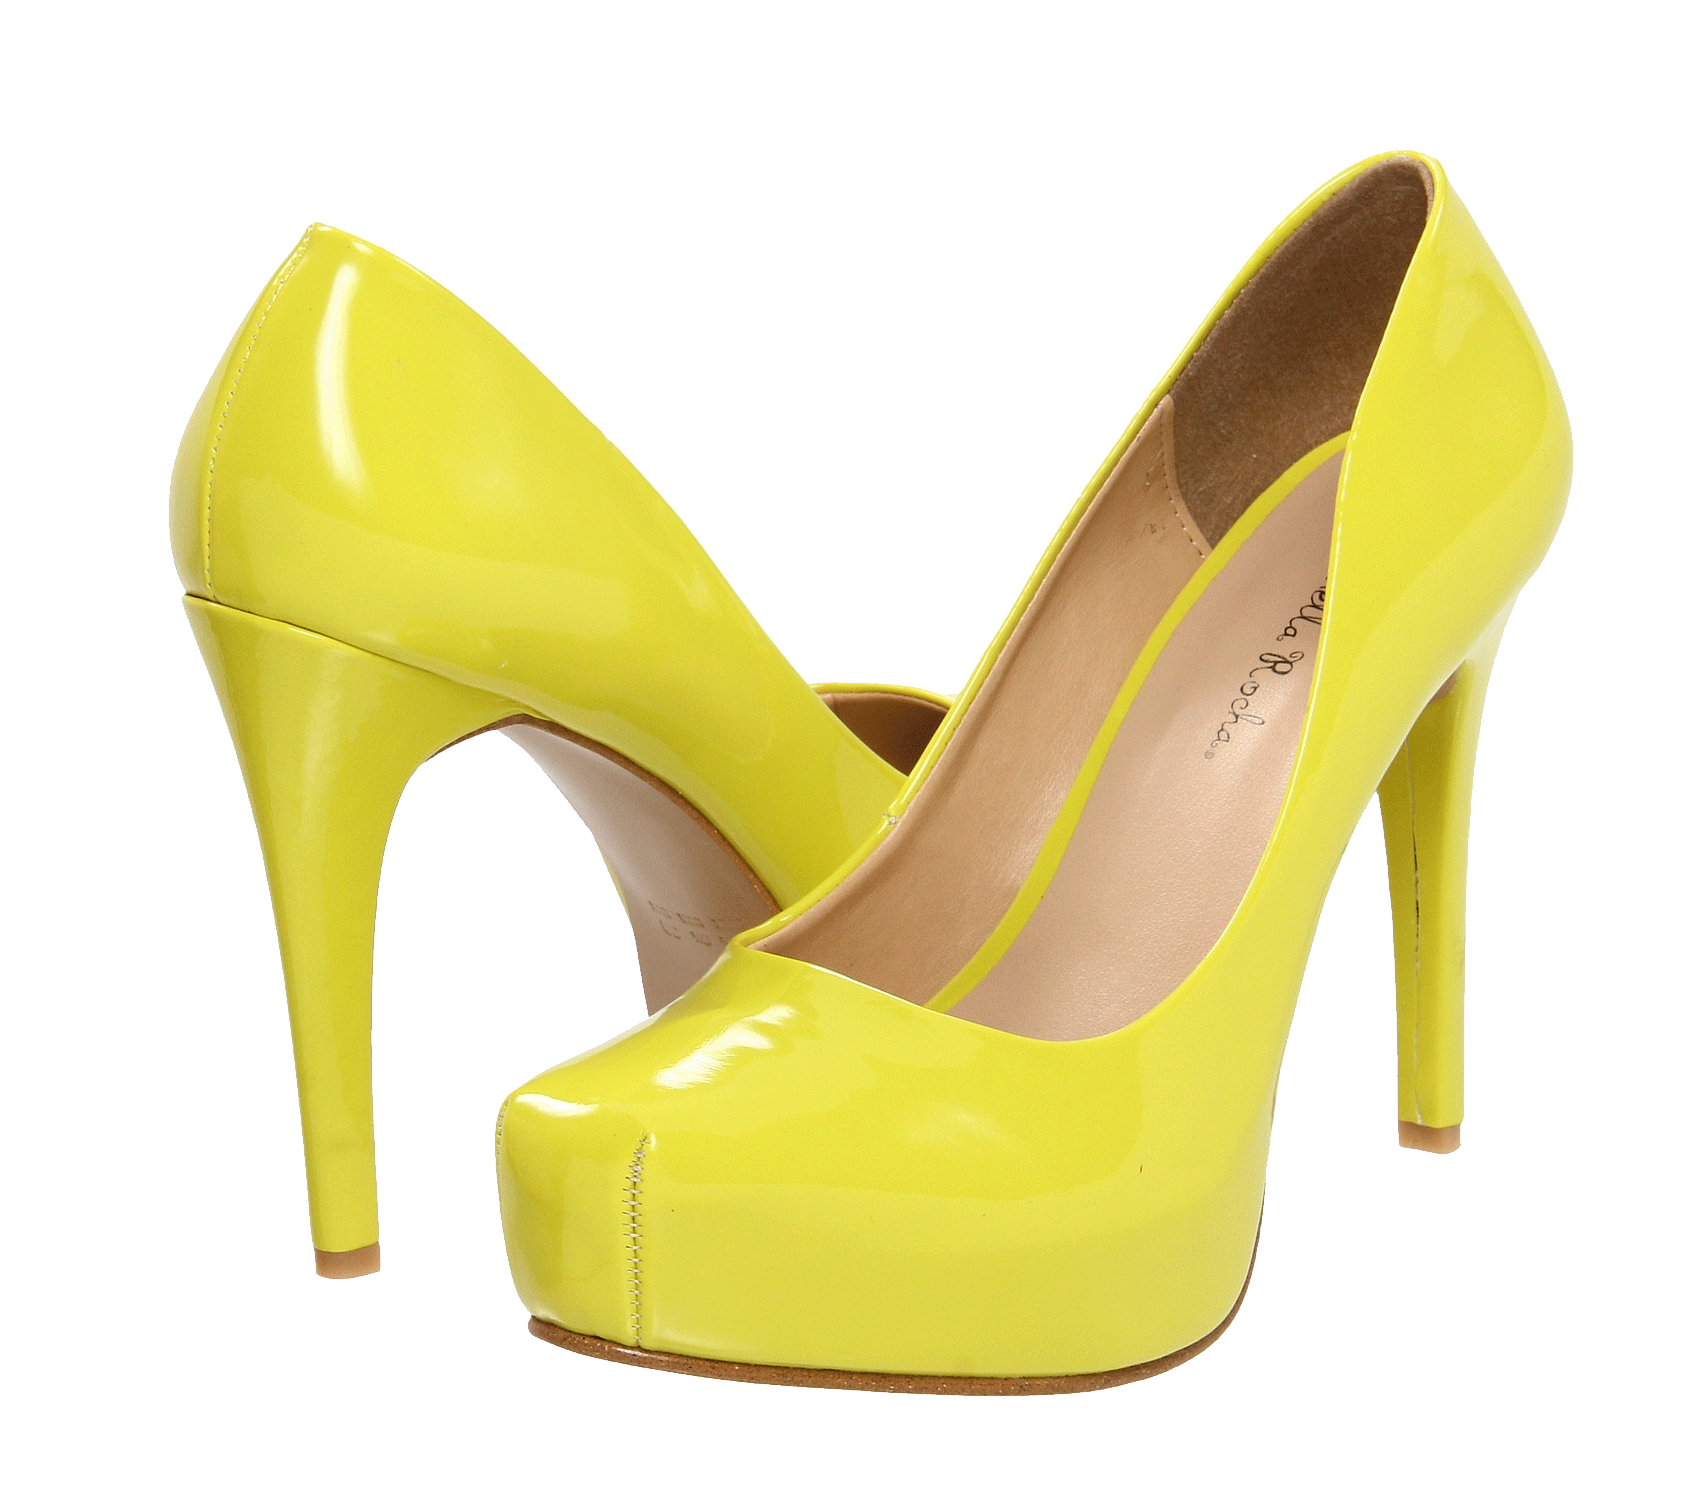 Yellow Women Shoes PNG Picture pngteam.com